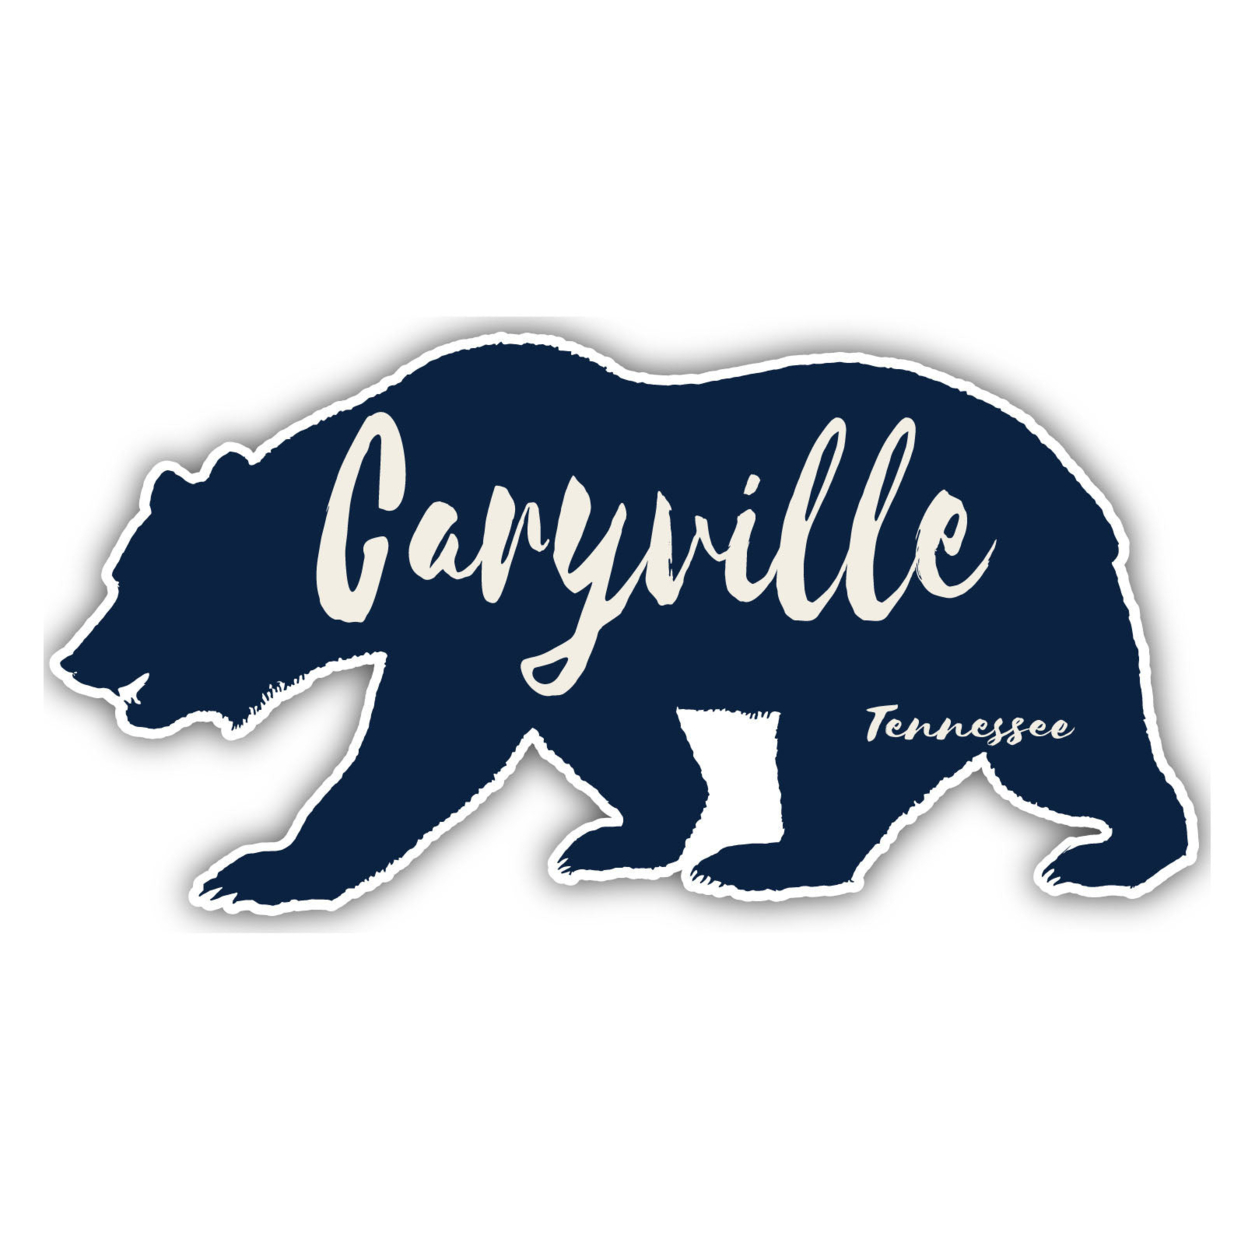 Caryville Tennessee Souvenir Decorative Stickers (Choose Theme And Size) - Single Unit, 8-Inch, Bear